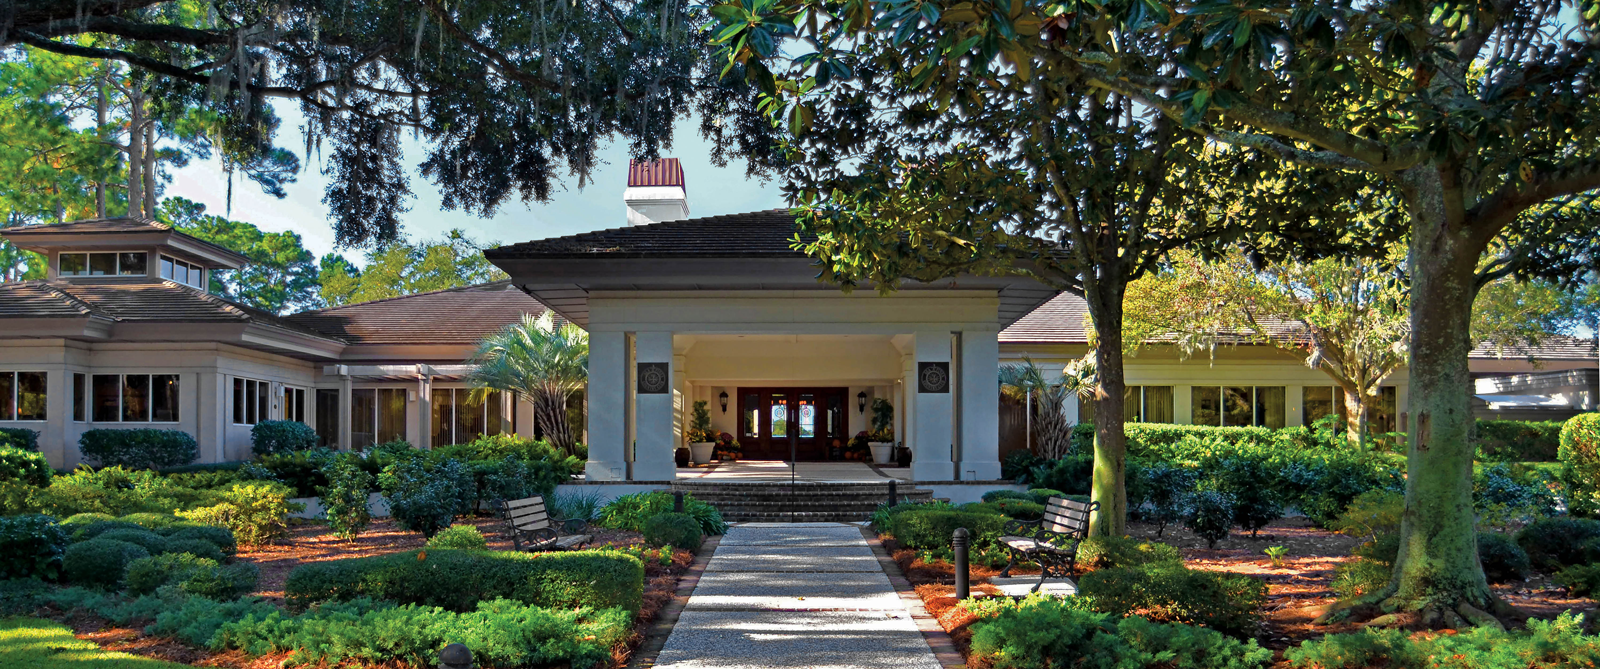 Sea Pines Country Club Announces, Sea Pines Landscaping